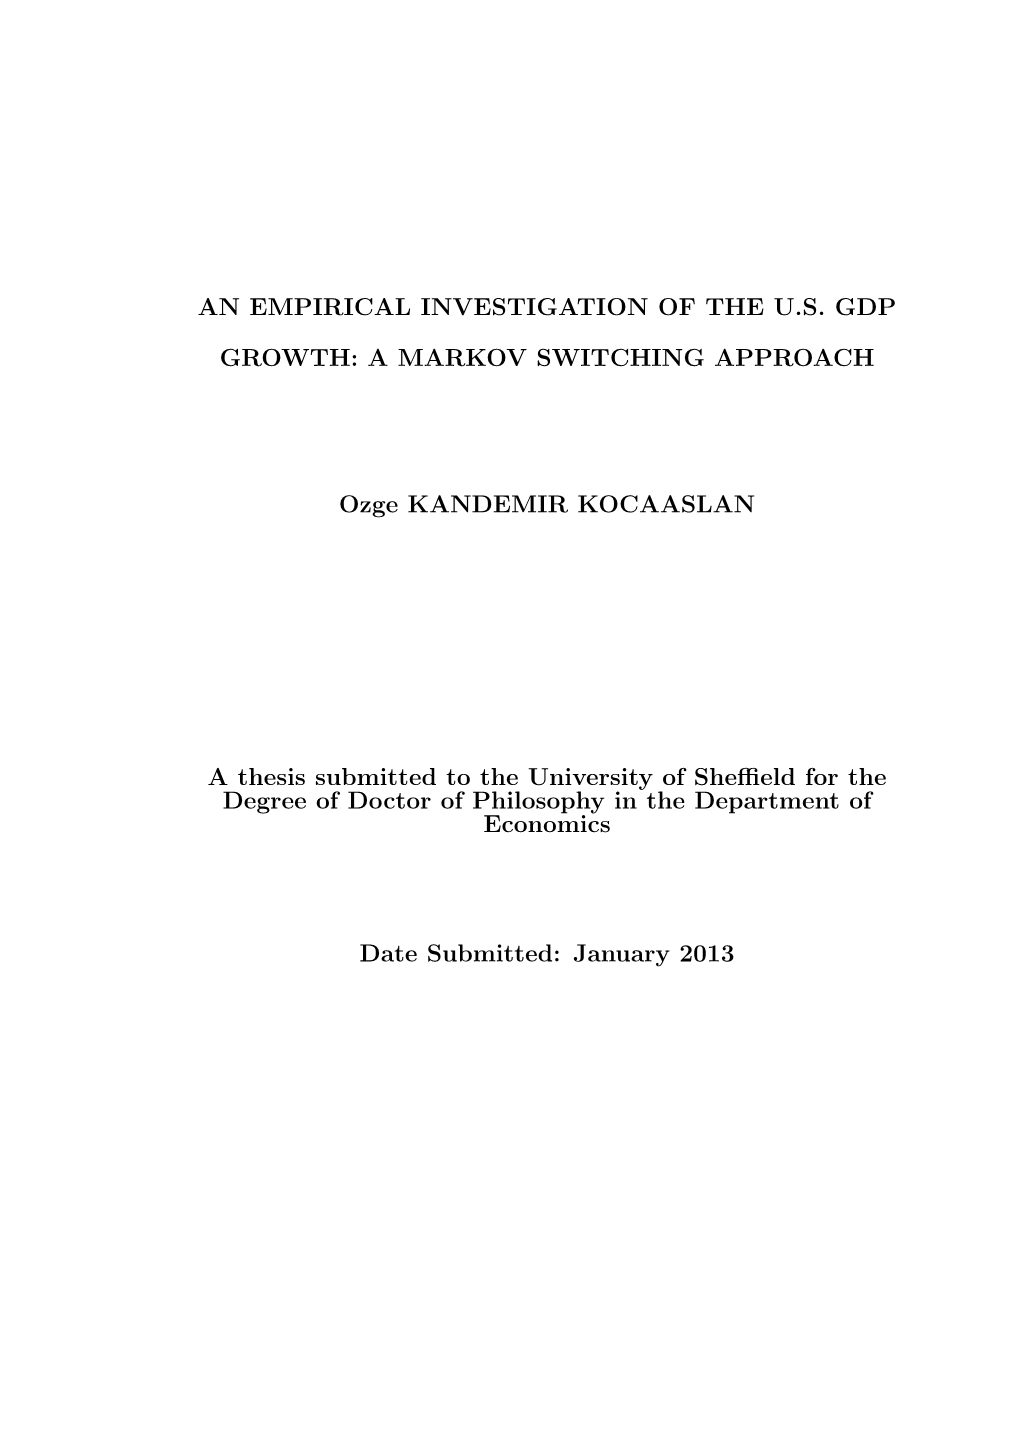 An Empirical Investigation of the U.S. Gdp Growth: A